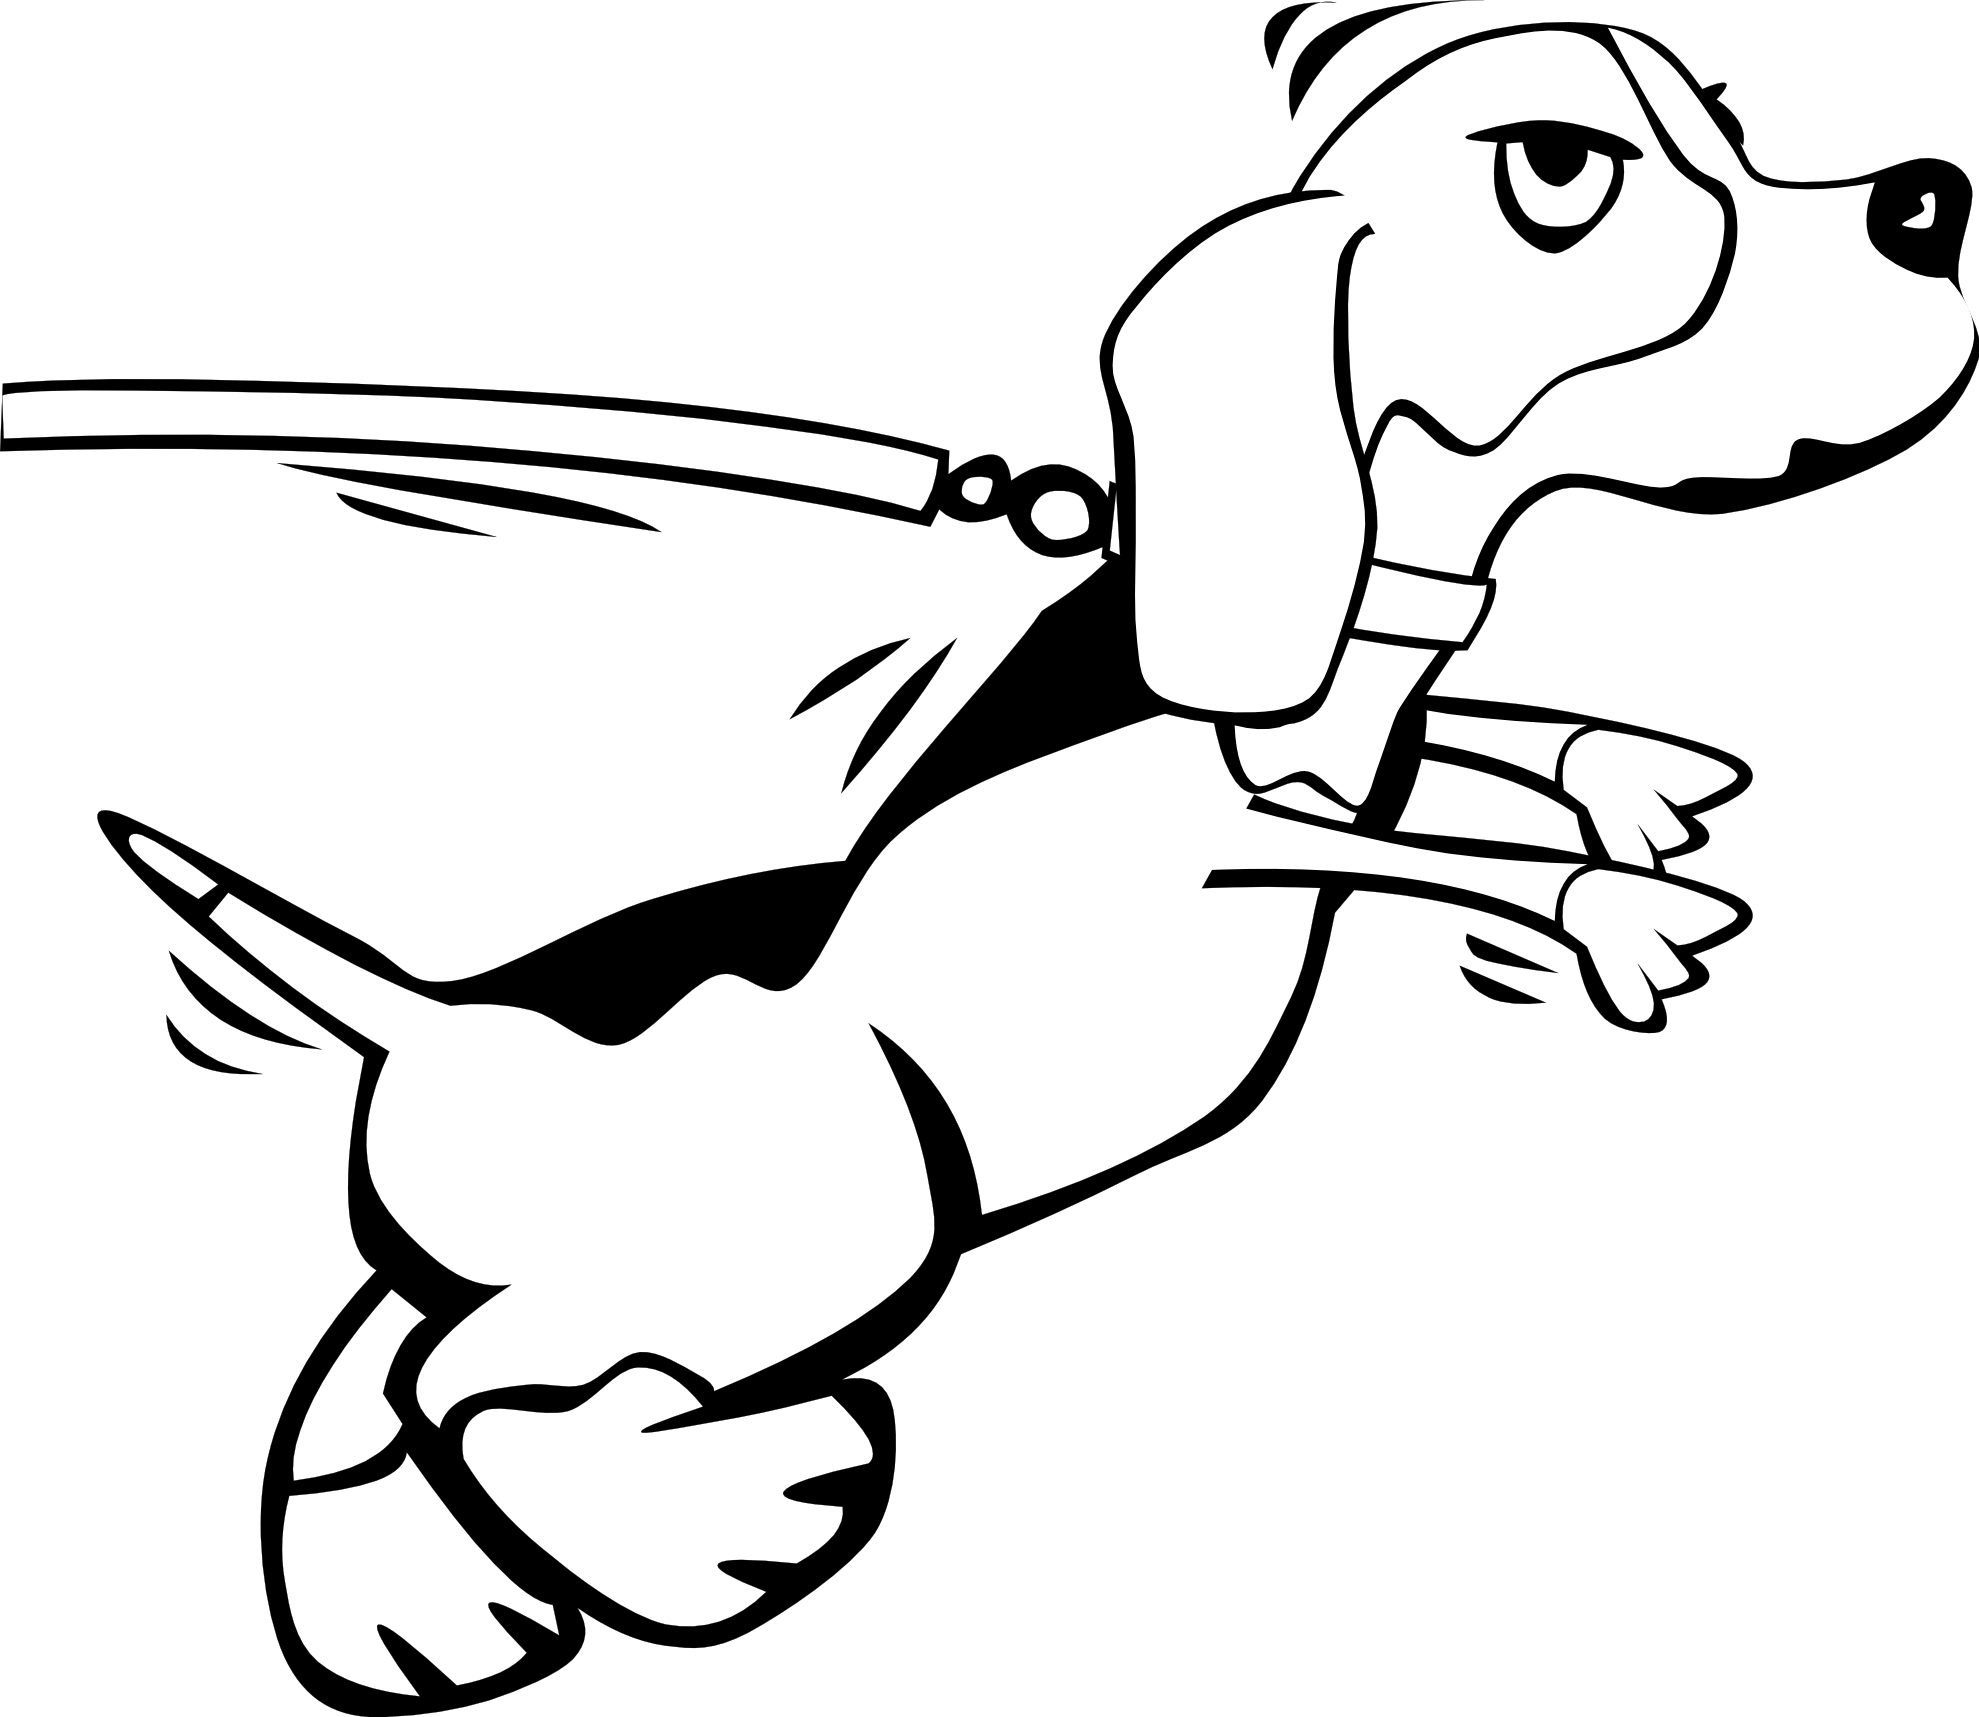 Free Black And White Dog Cartoon, Download Free Clip Art